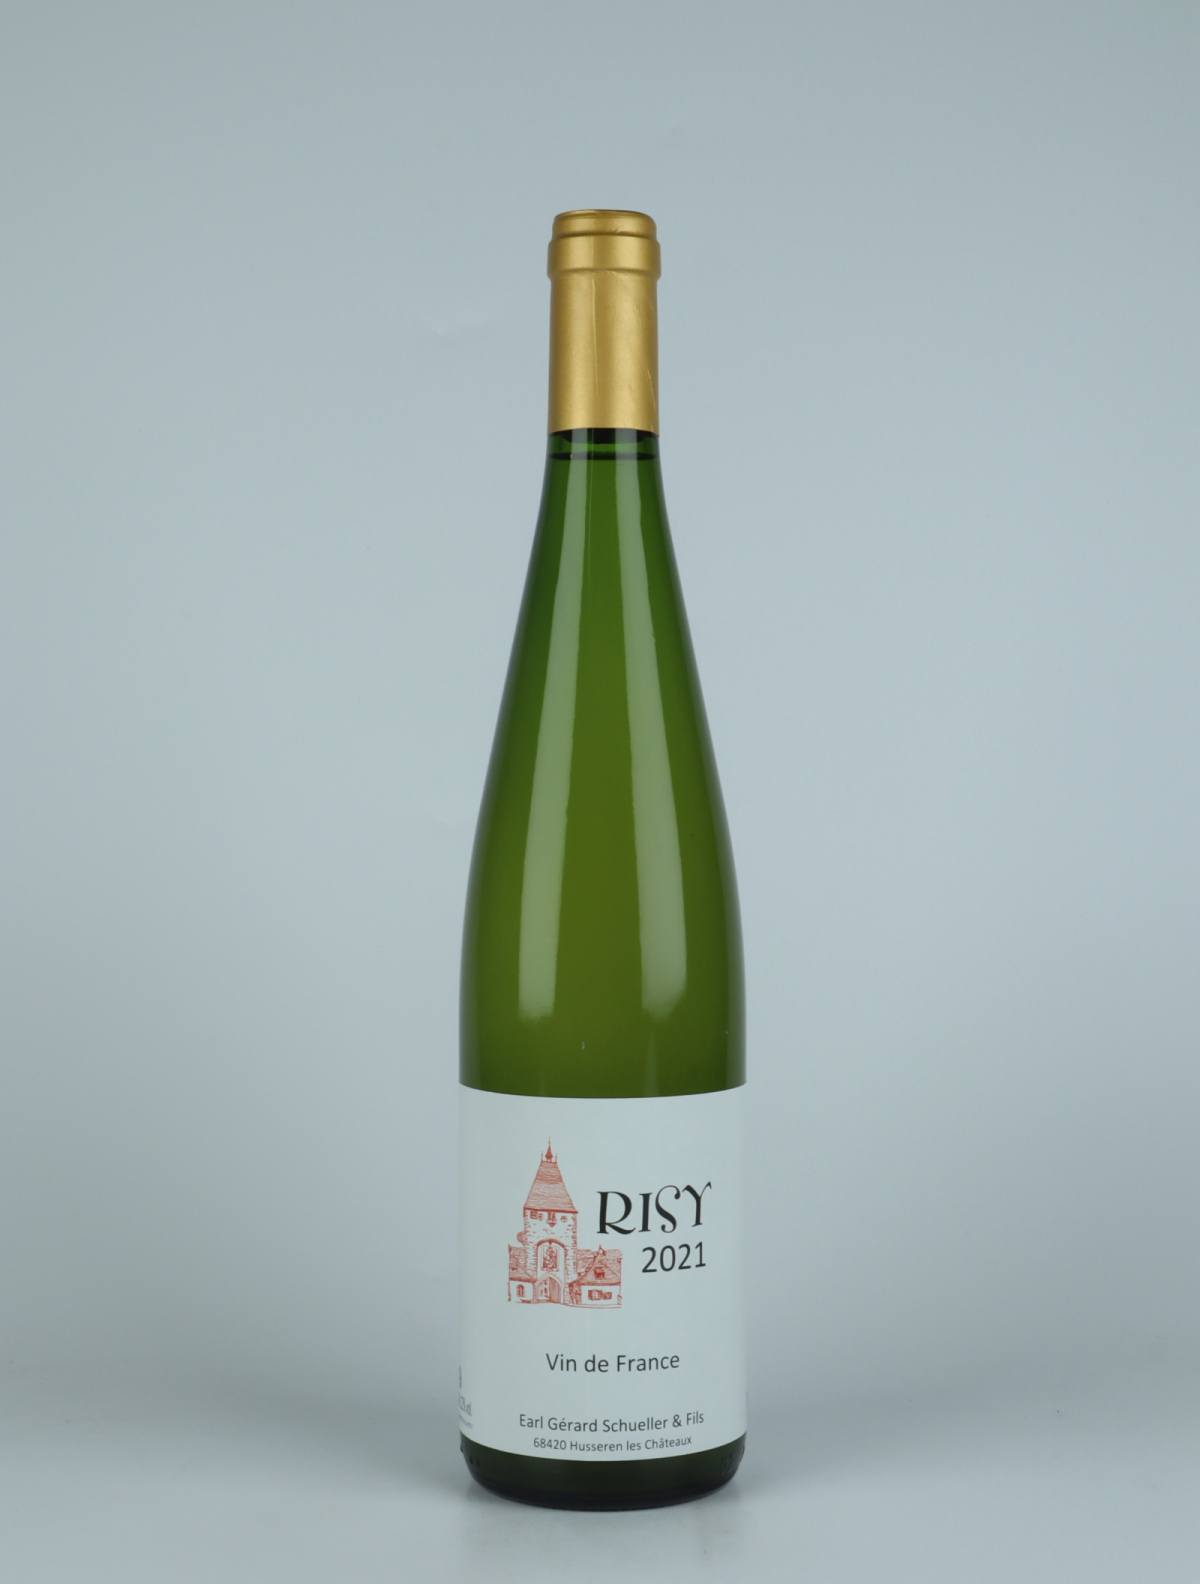 A bottle 2021 Risy White wine from Gérard Schueller, Alsace in France